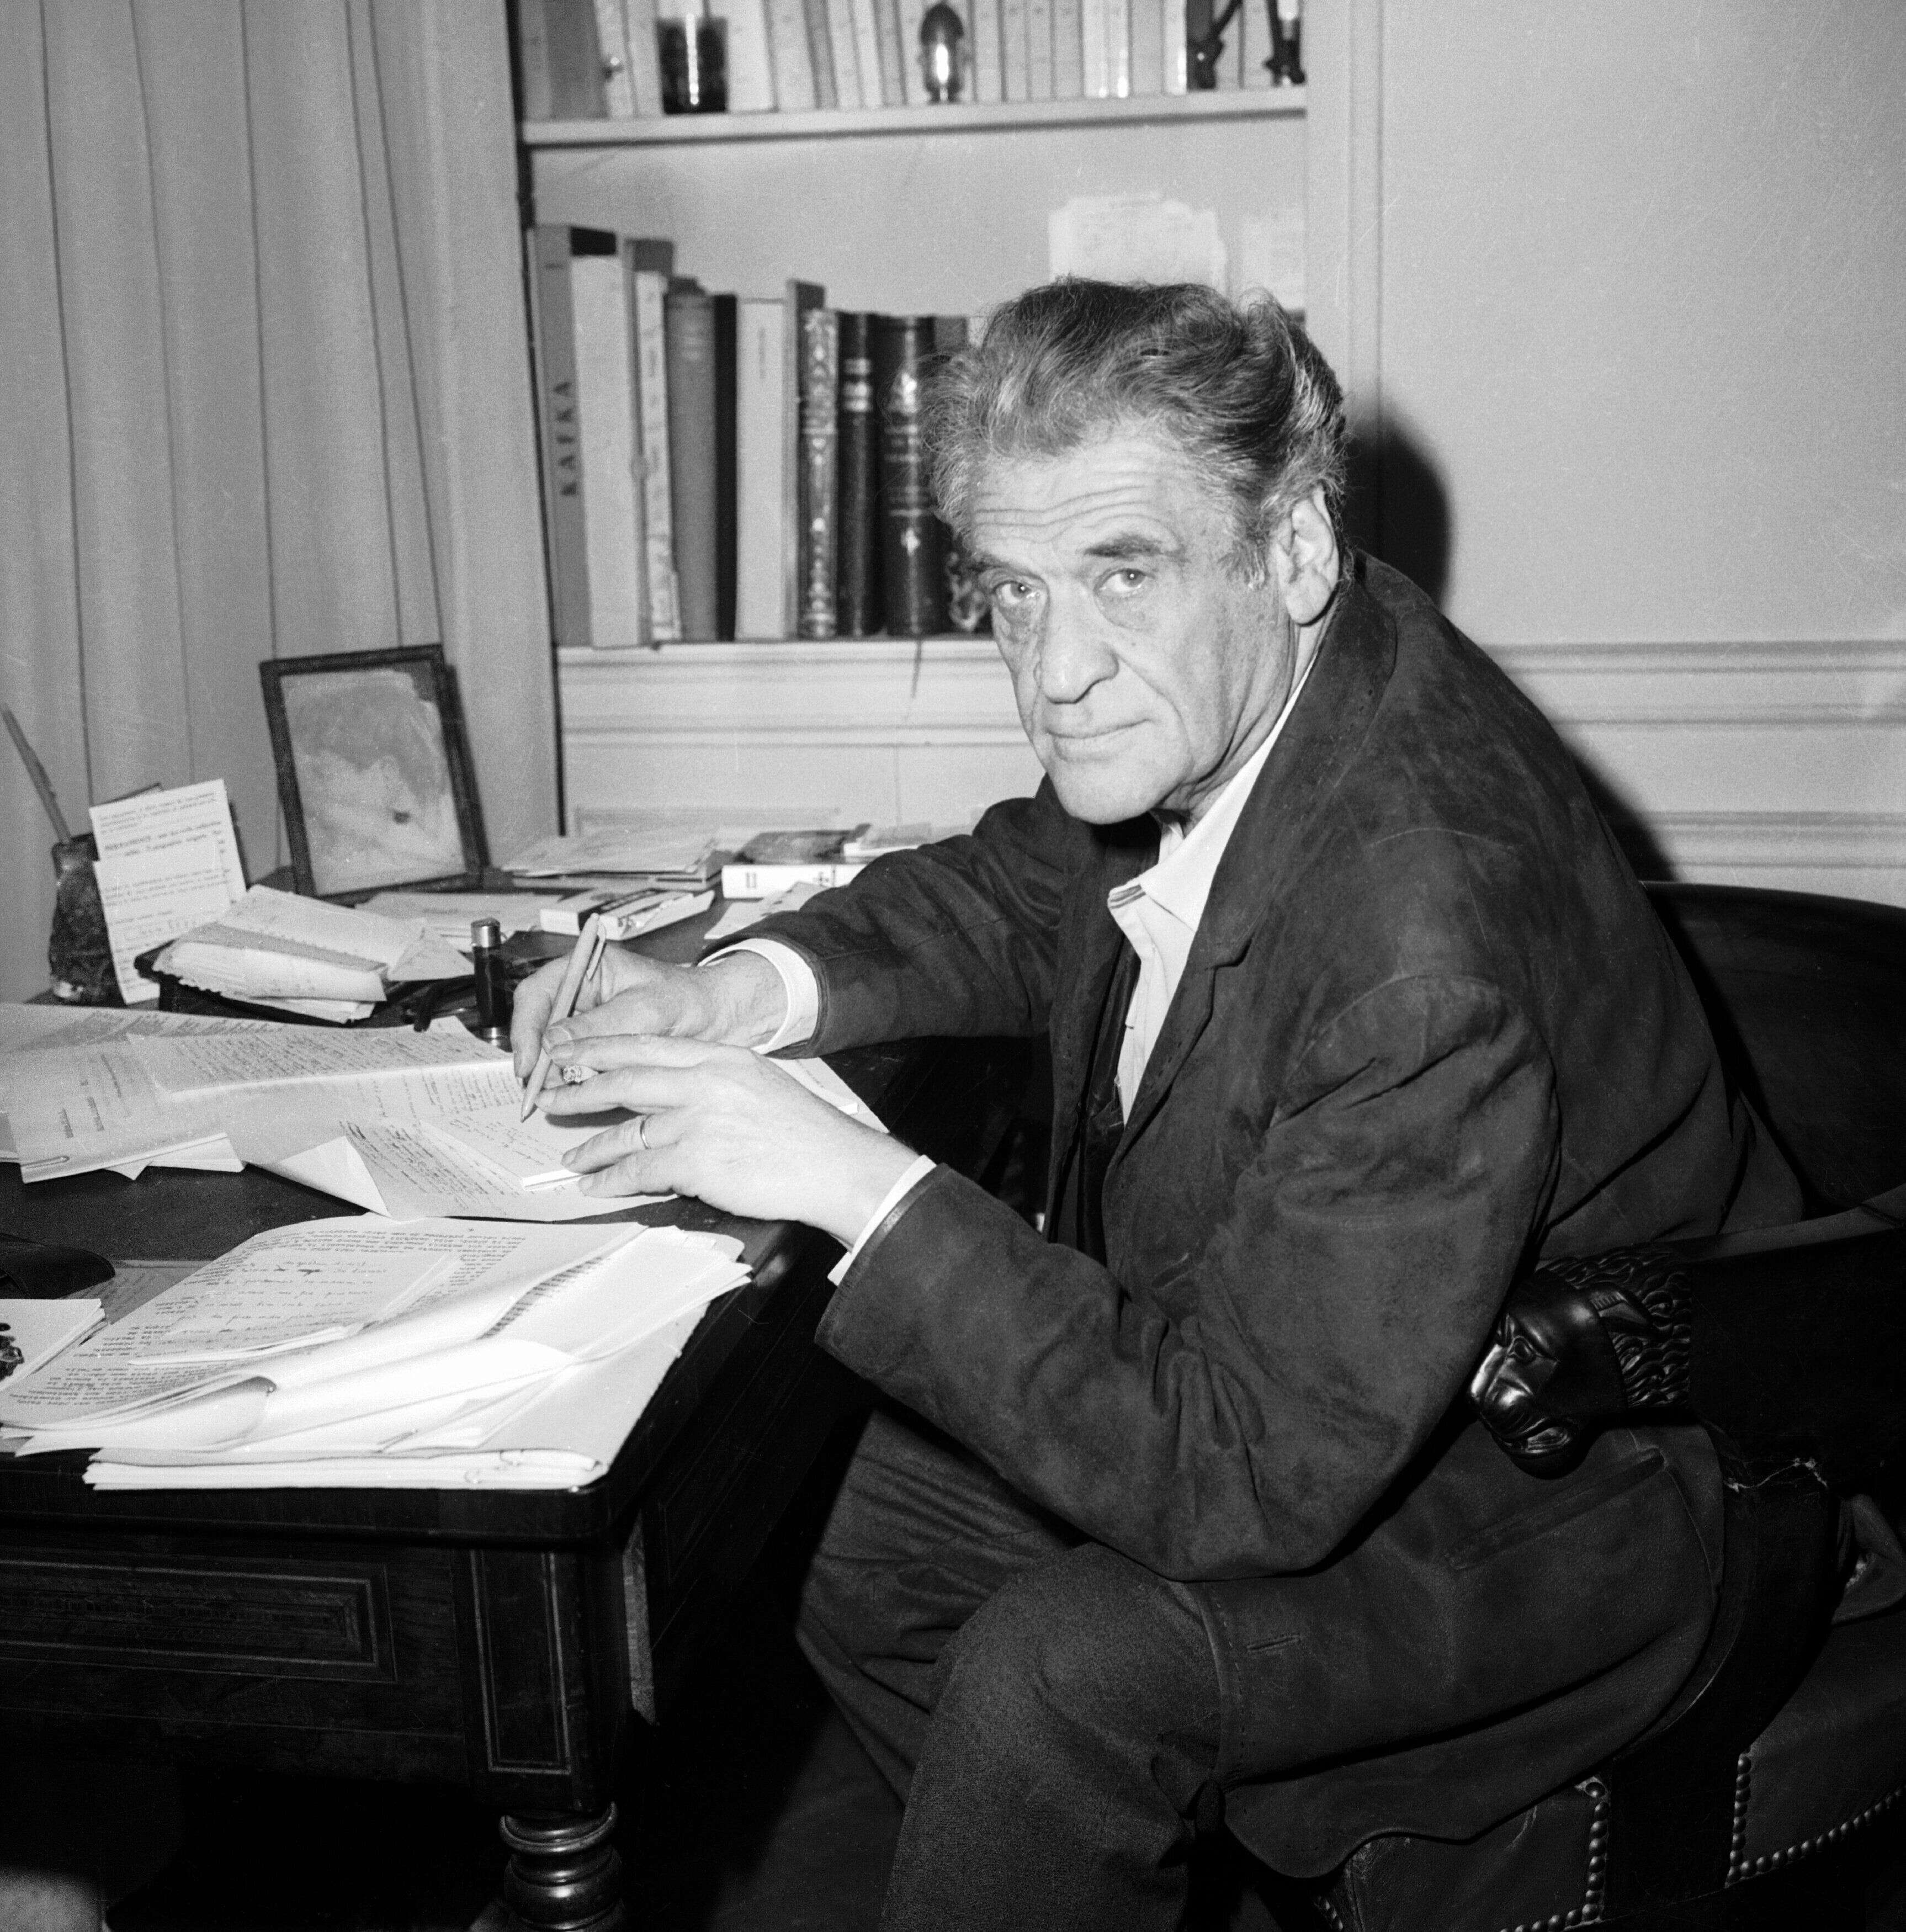 FRANCE - SEPTEMBER 30:  The French writer Joseph KESSEL at his desk in his home on September 30, 1968.  (Photo by Keystone-France/Gamma-Keystone via Getty Images)